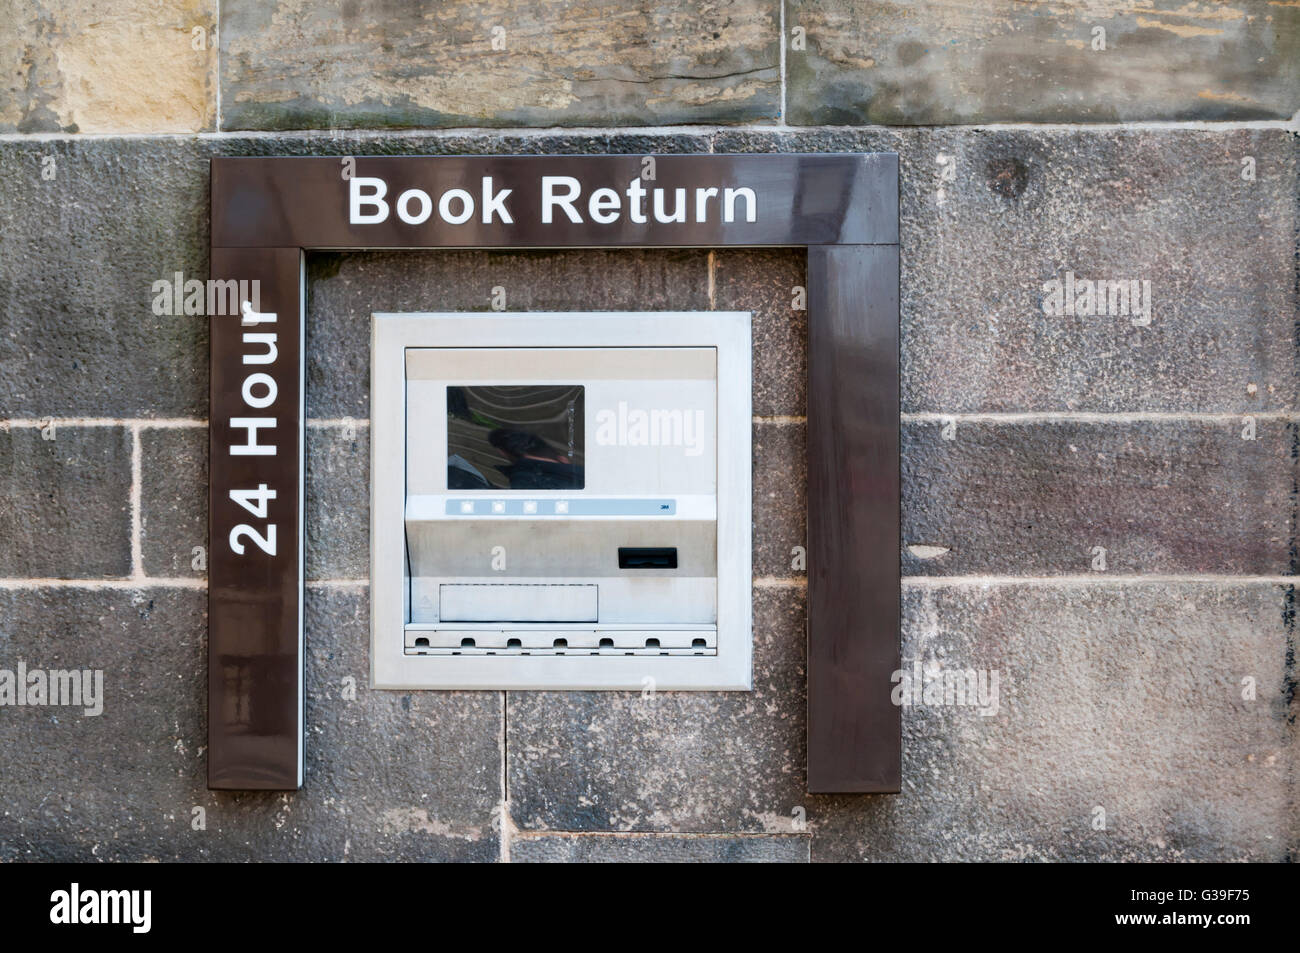 24 hour book return outside a public library. Stock Photo